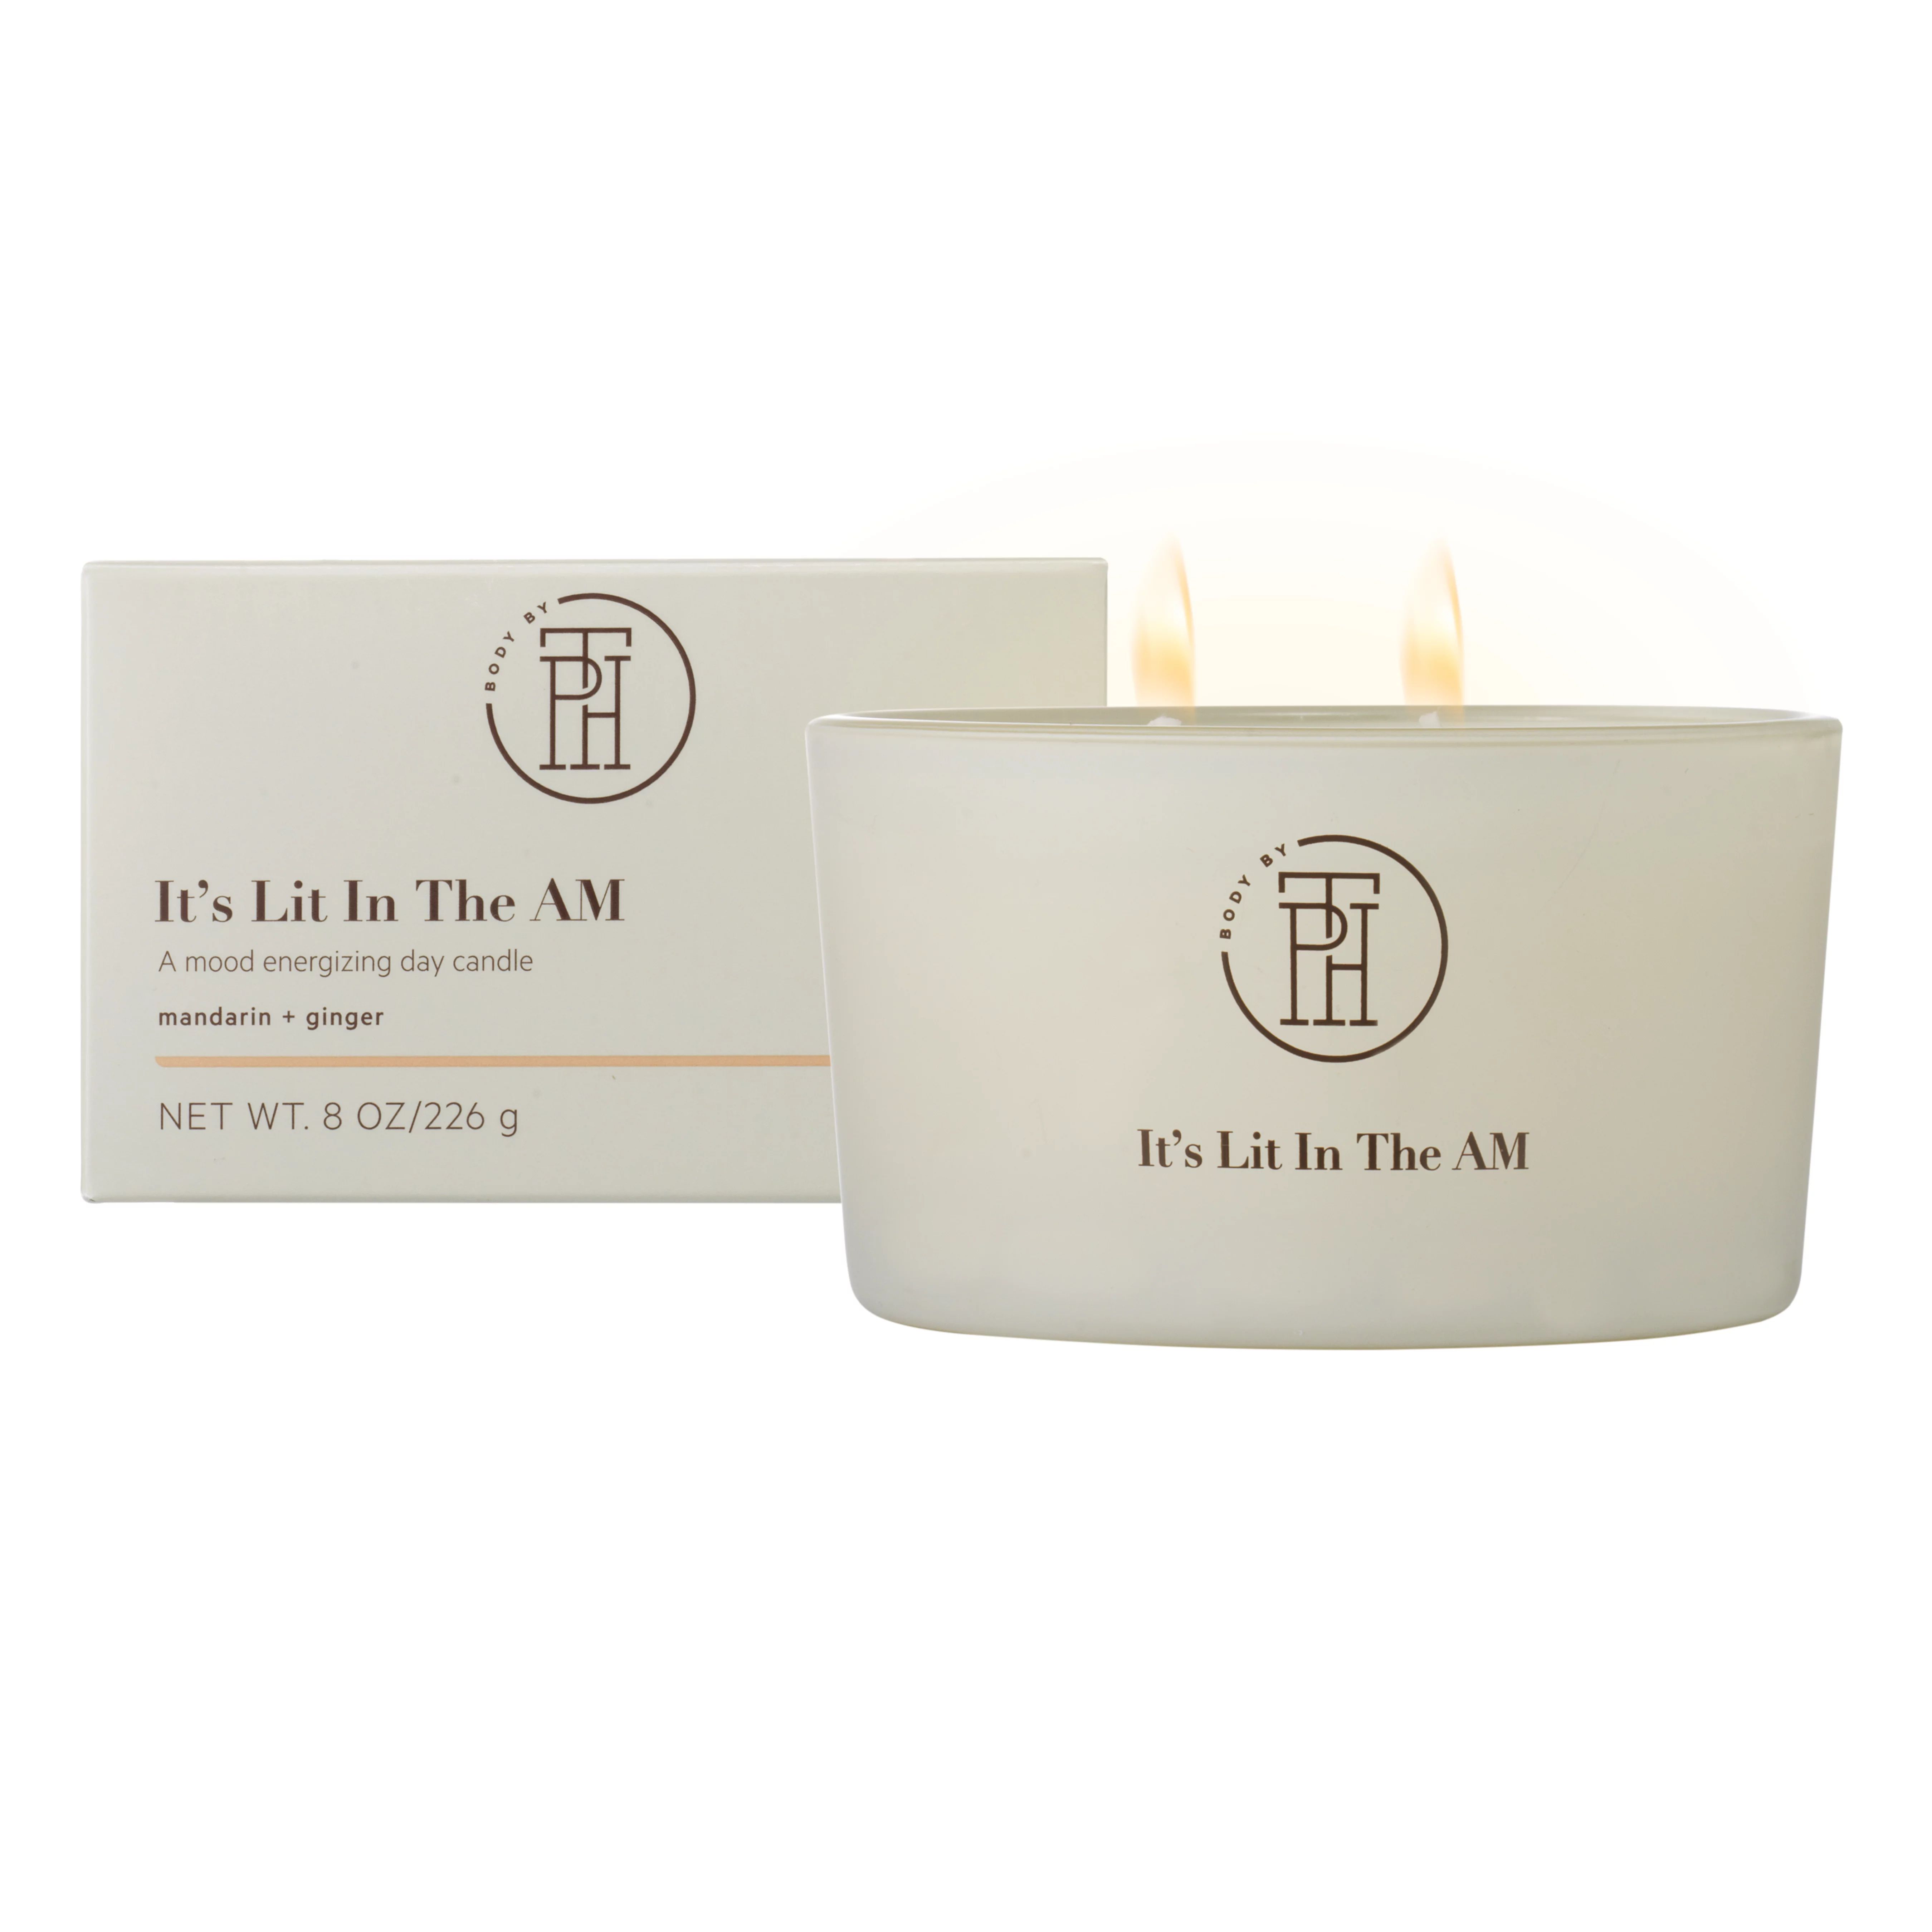 BODY BY TPH It’s Lit In The AM Scented Soy Wax Blend Candle, 8 oz. | Walmart (US)